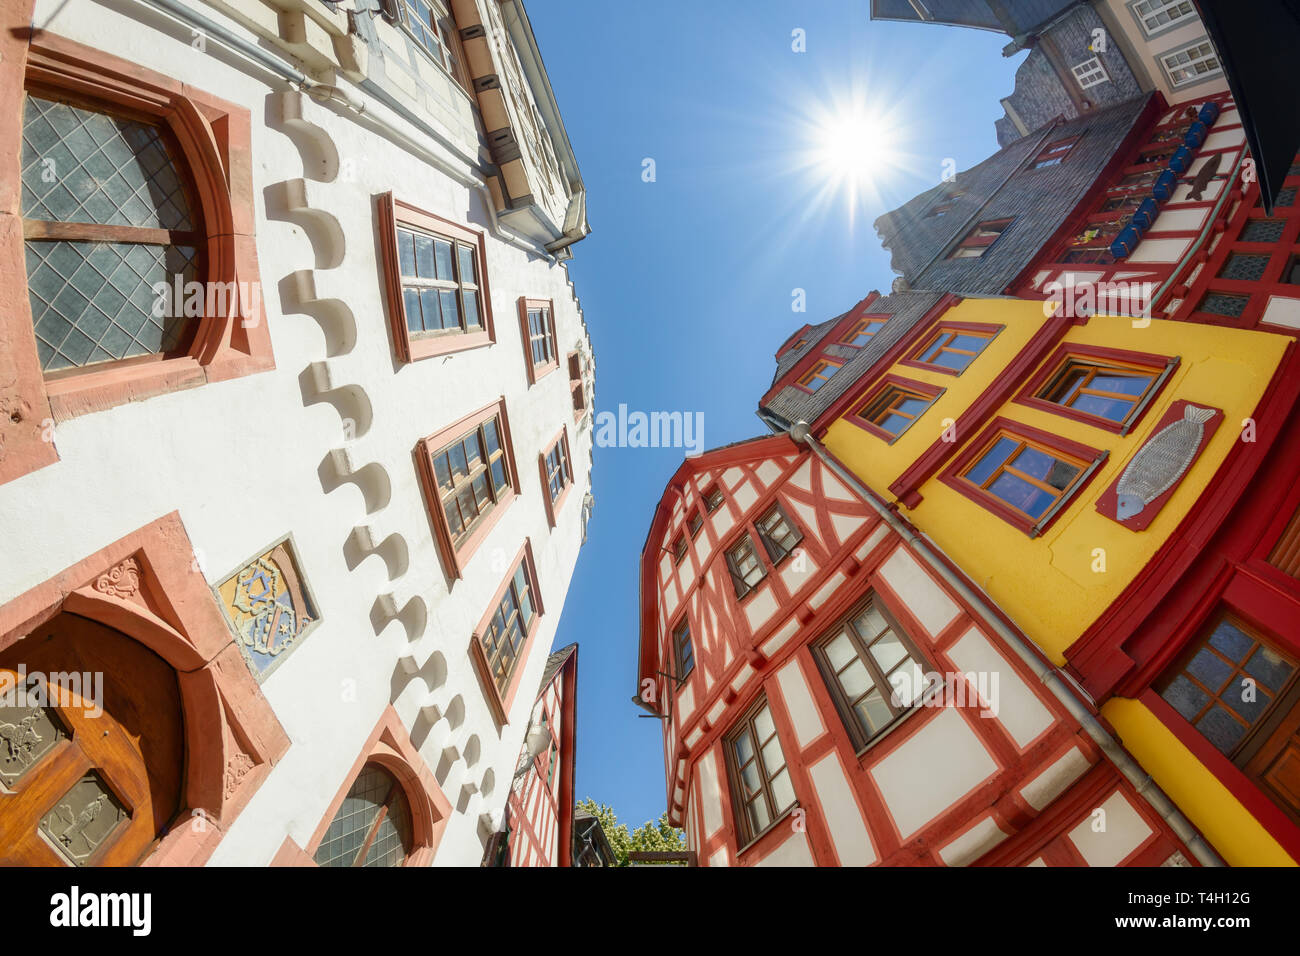 The old town Limburg an der Lahn with colorful mediaeval half timbered houses, wide angle view from down to top on a sunny day, Hesse, Germany Stock Photo